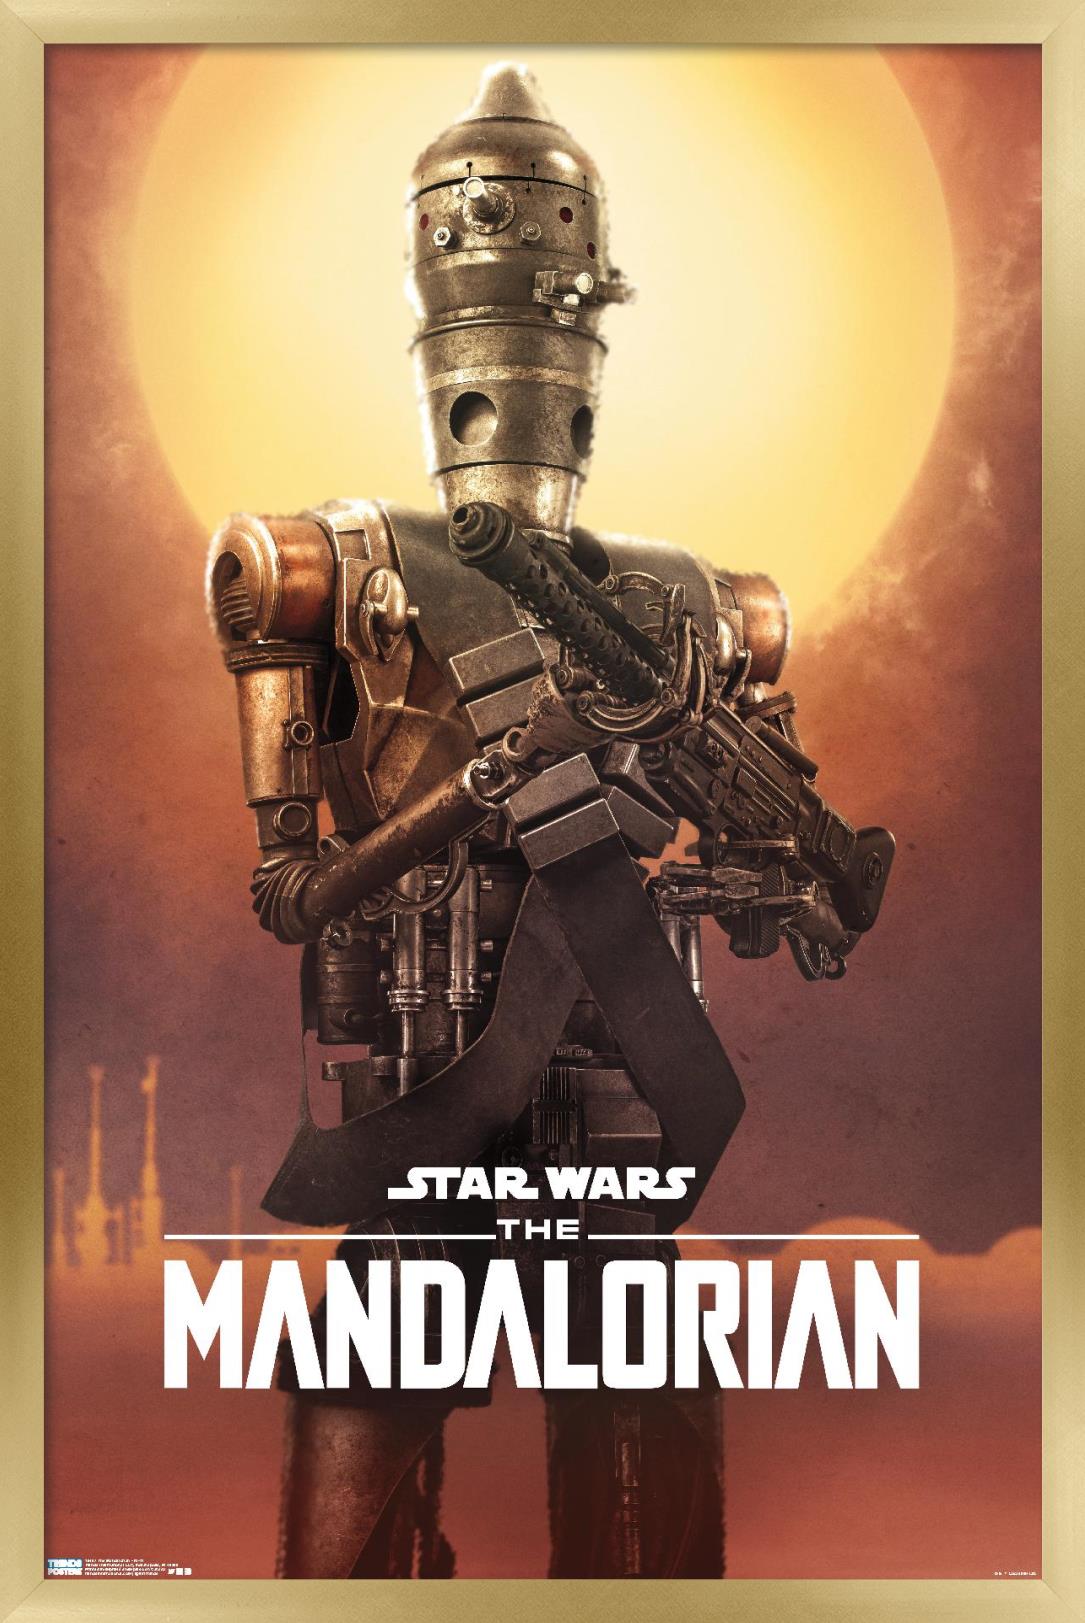 Star Wars: The Mandalorian - IG-11 Wall Poster, 14.725" x 22.375", Framed - image 1 of 5